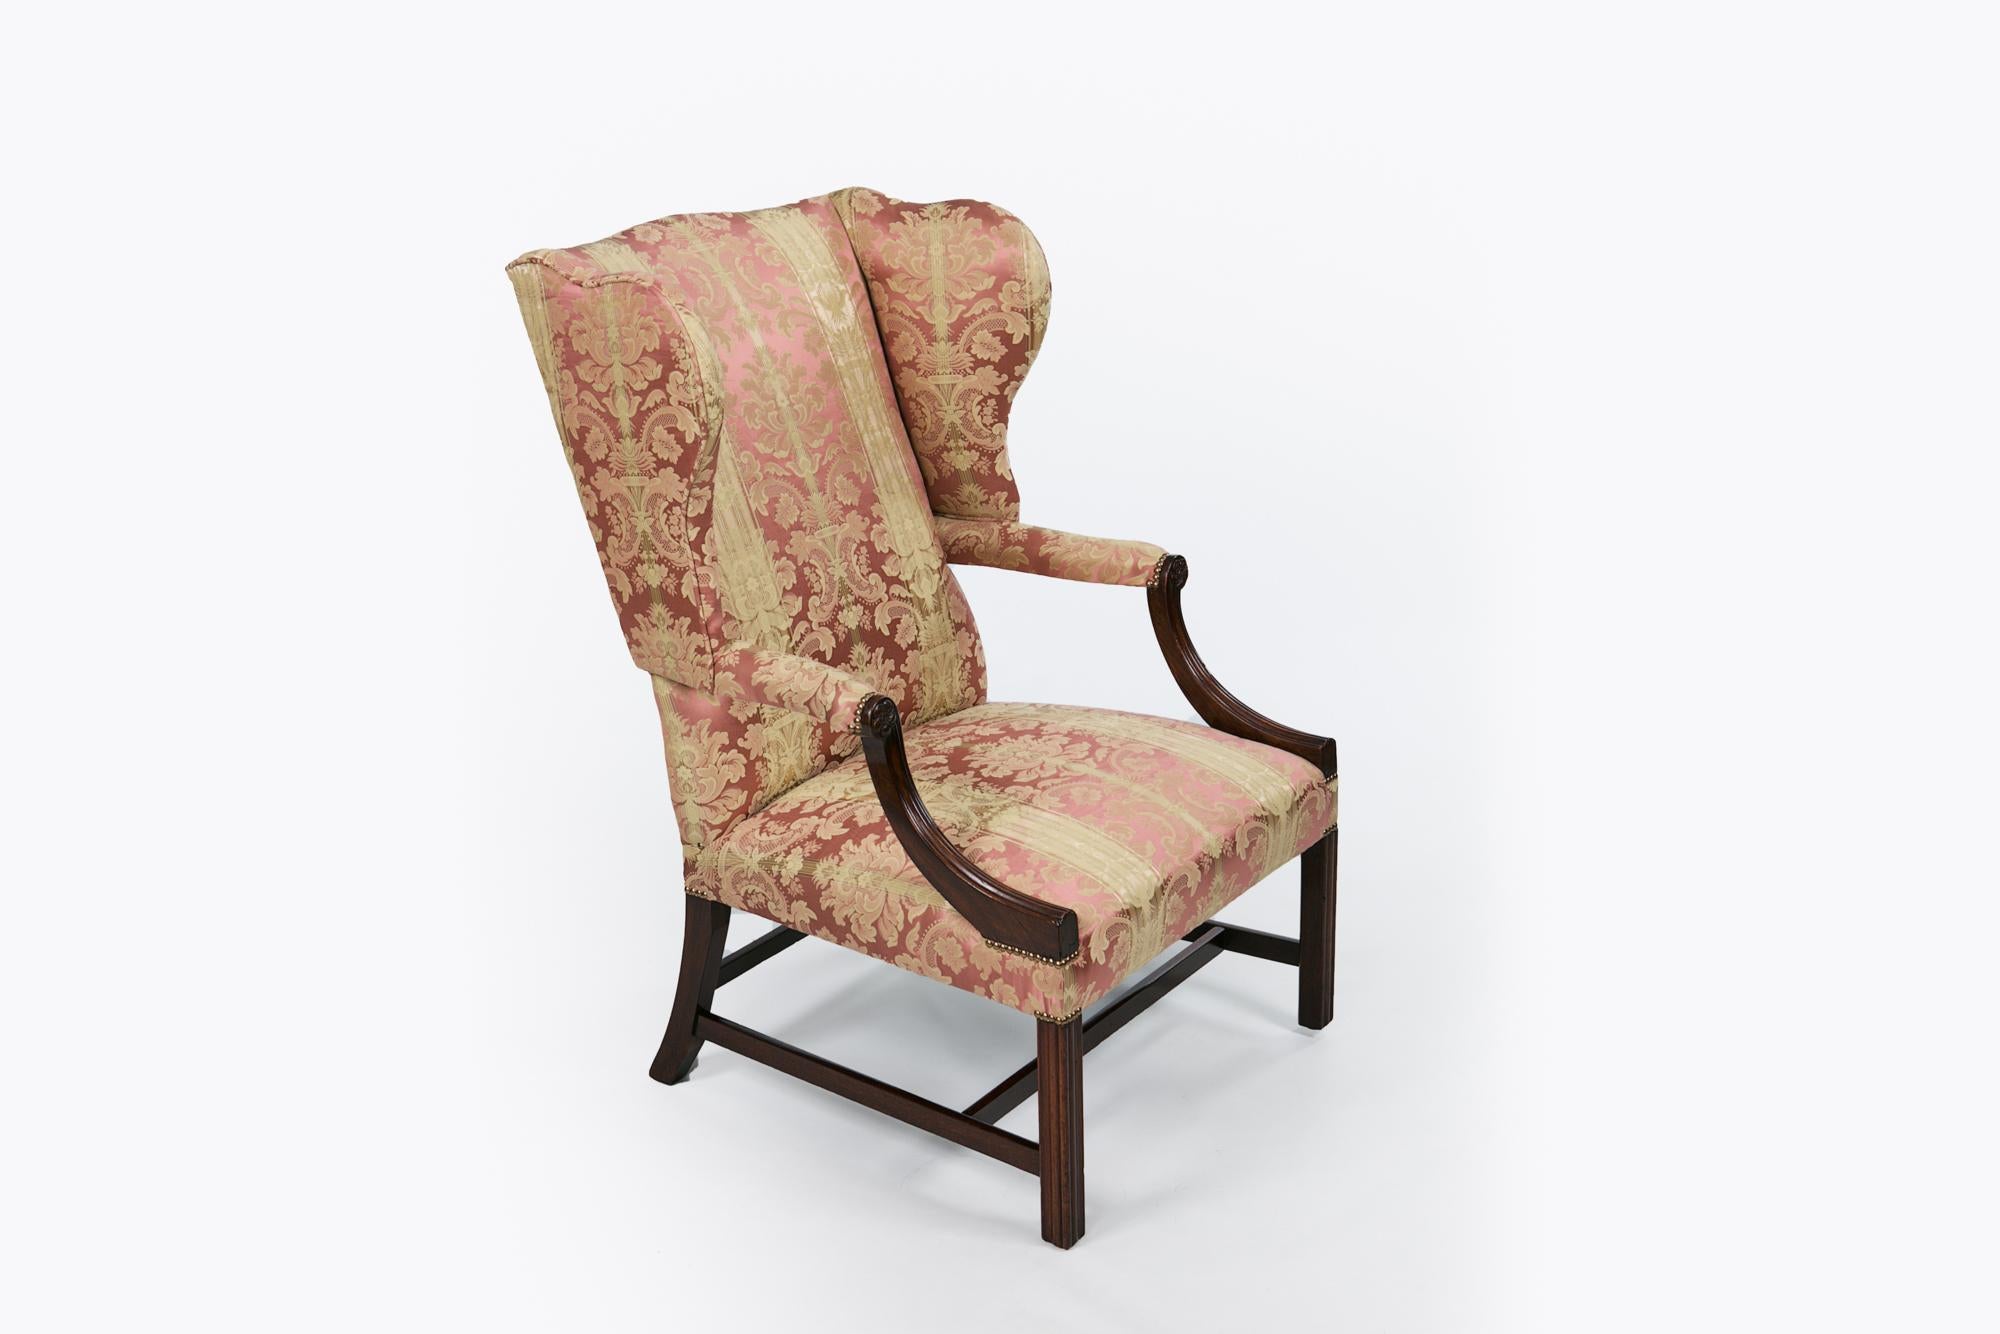 Early 19th century George III mahogany upholstered wing chair, the shaped back with outscrolled wings raised above padded arms with reeded terminals with flower head motif raised over squared moulded leg joined by a H-stretcher.